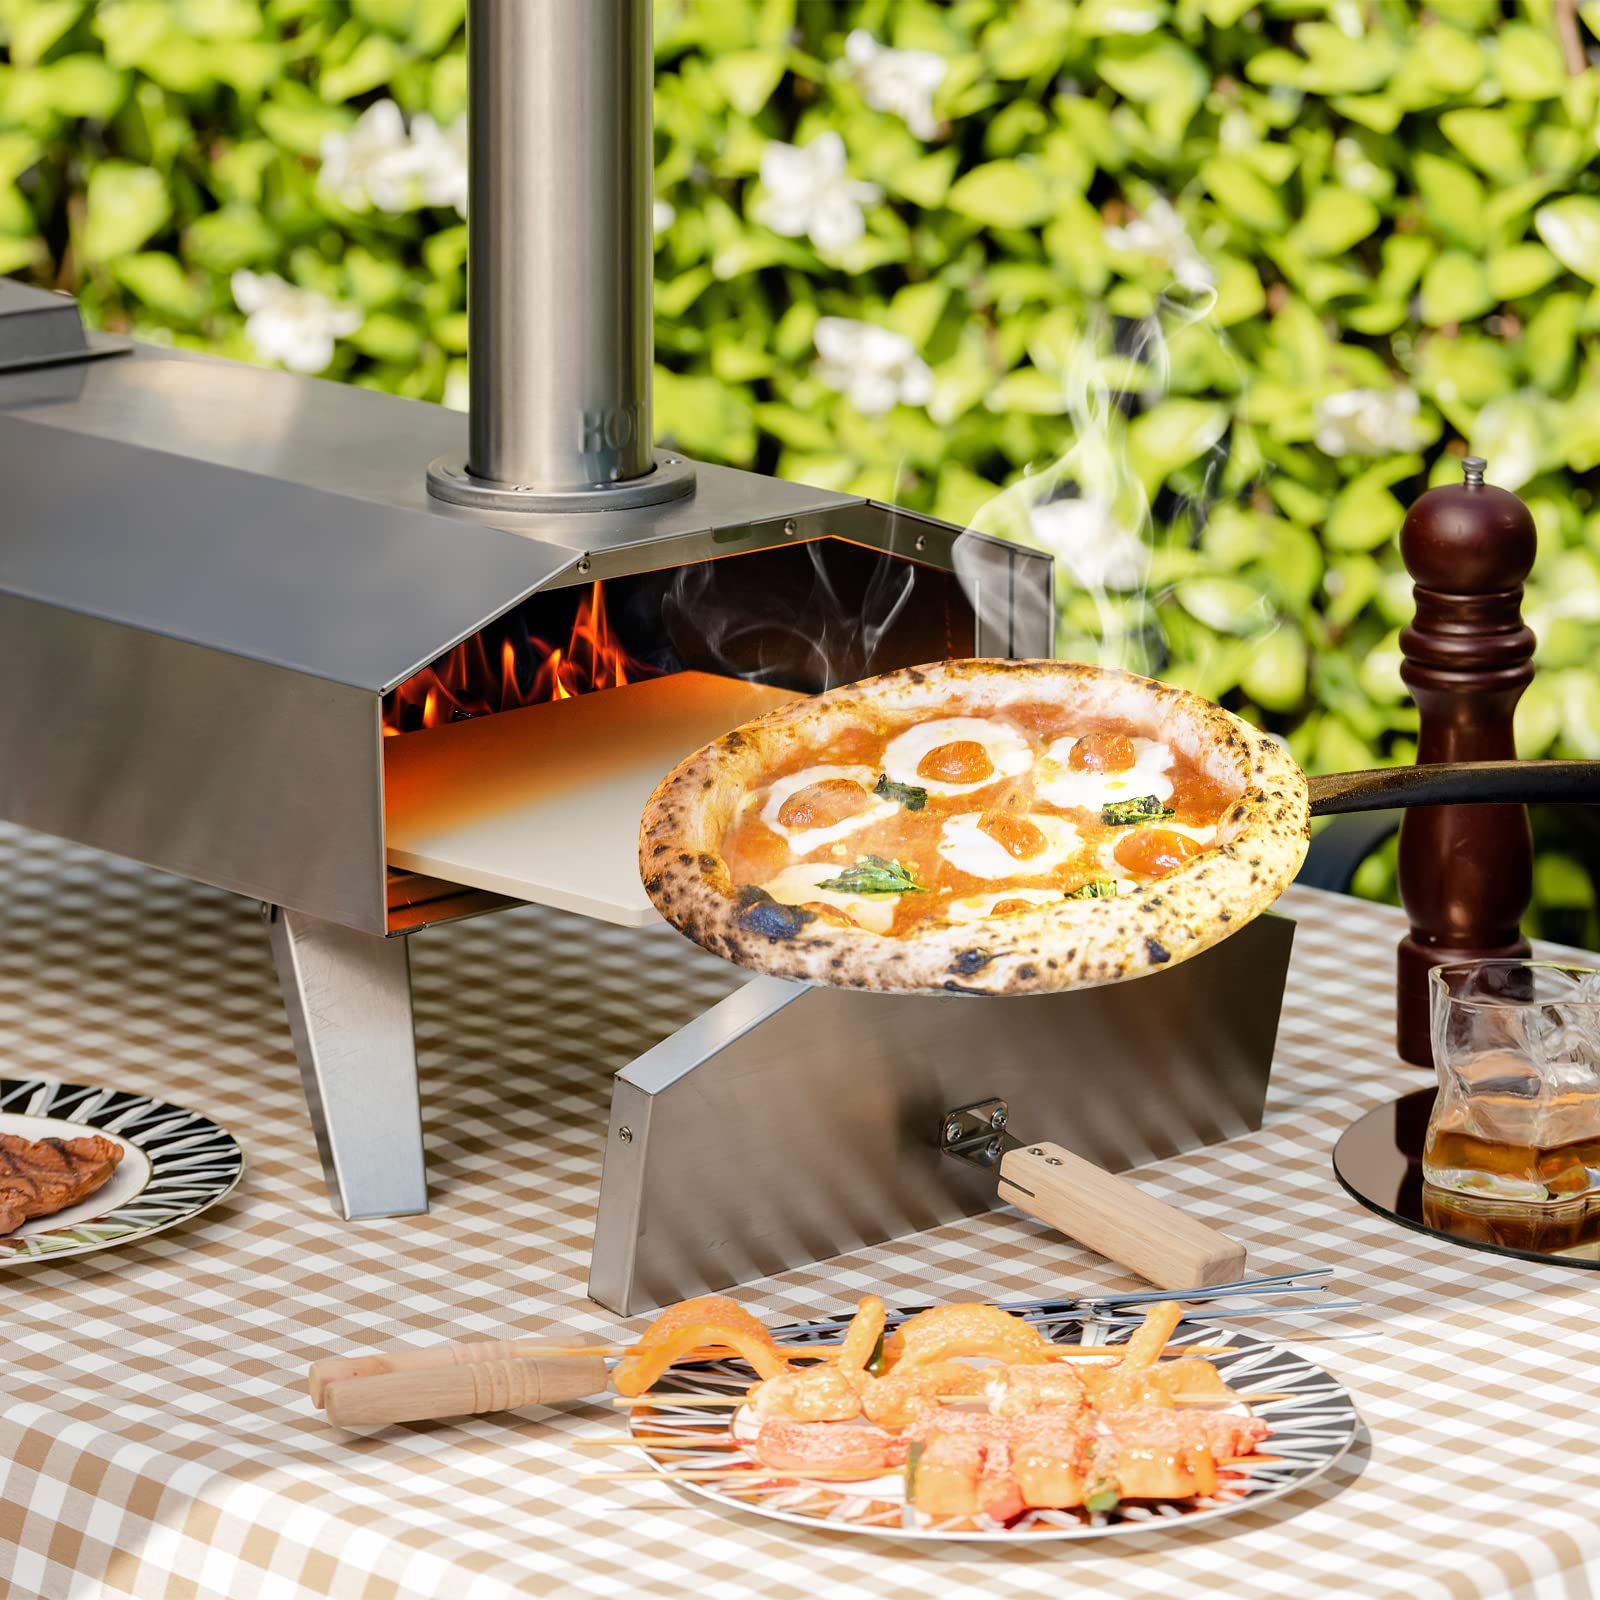 PETSITE Pizza Oven Outdoor, Wood Fired Pizza Oven with 12 Inches Pizza Stone, Portable Stainless Steel Wood Pellet Grill Pizza Maker for Outside Backyard Camping Party Cooking